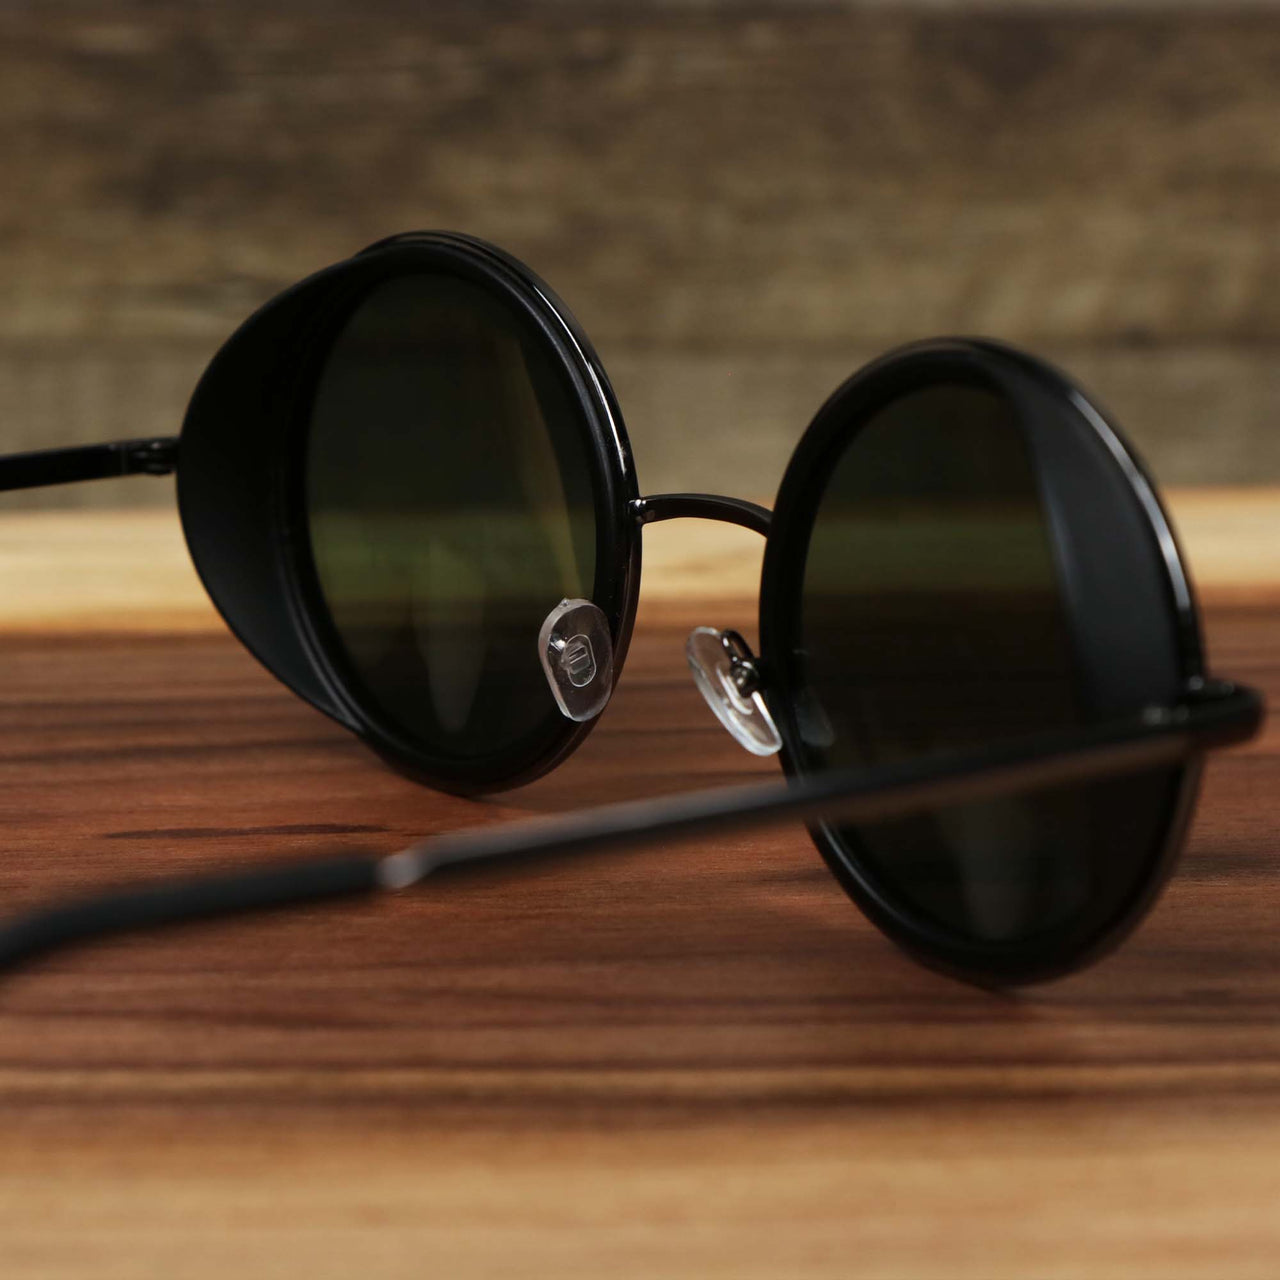 The back of the Circle Frame Black Lens Sunglasses with Black Frame